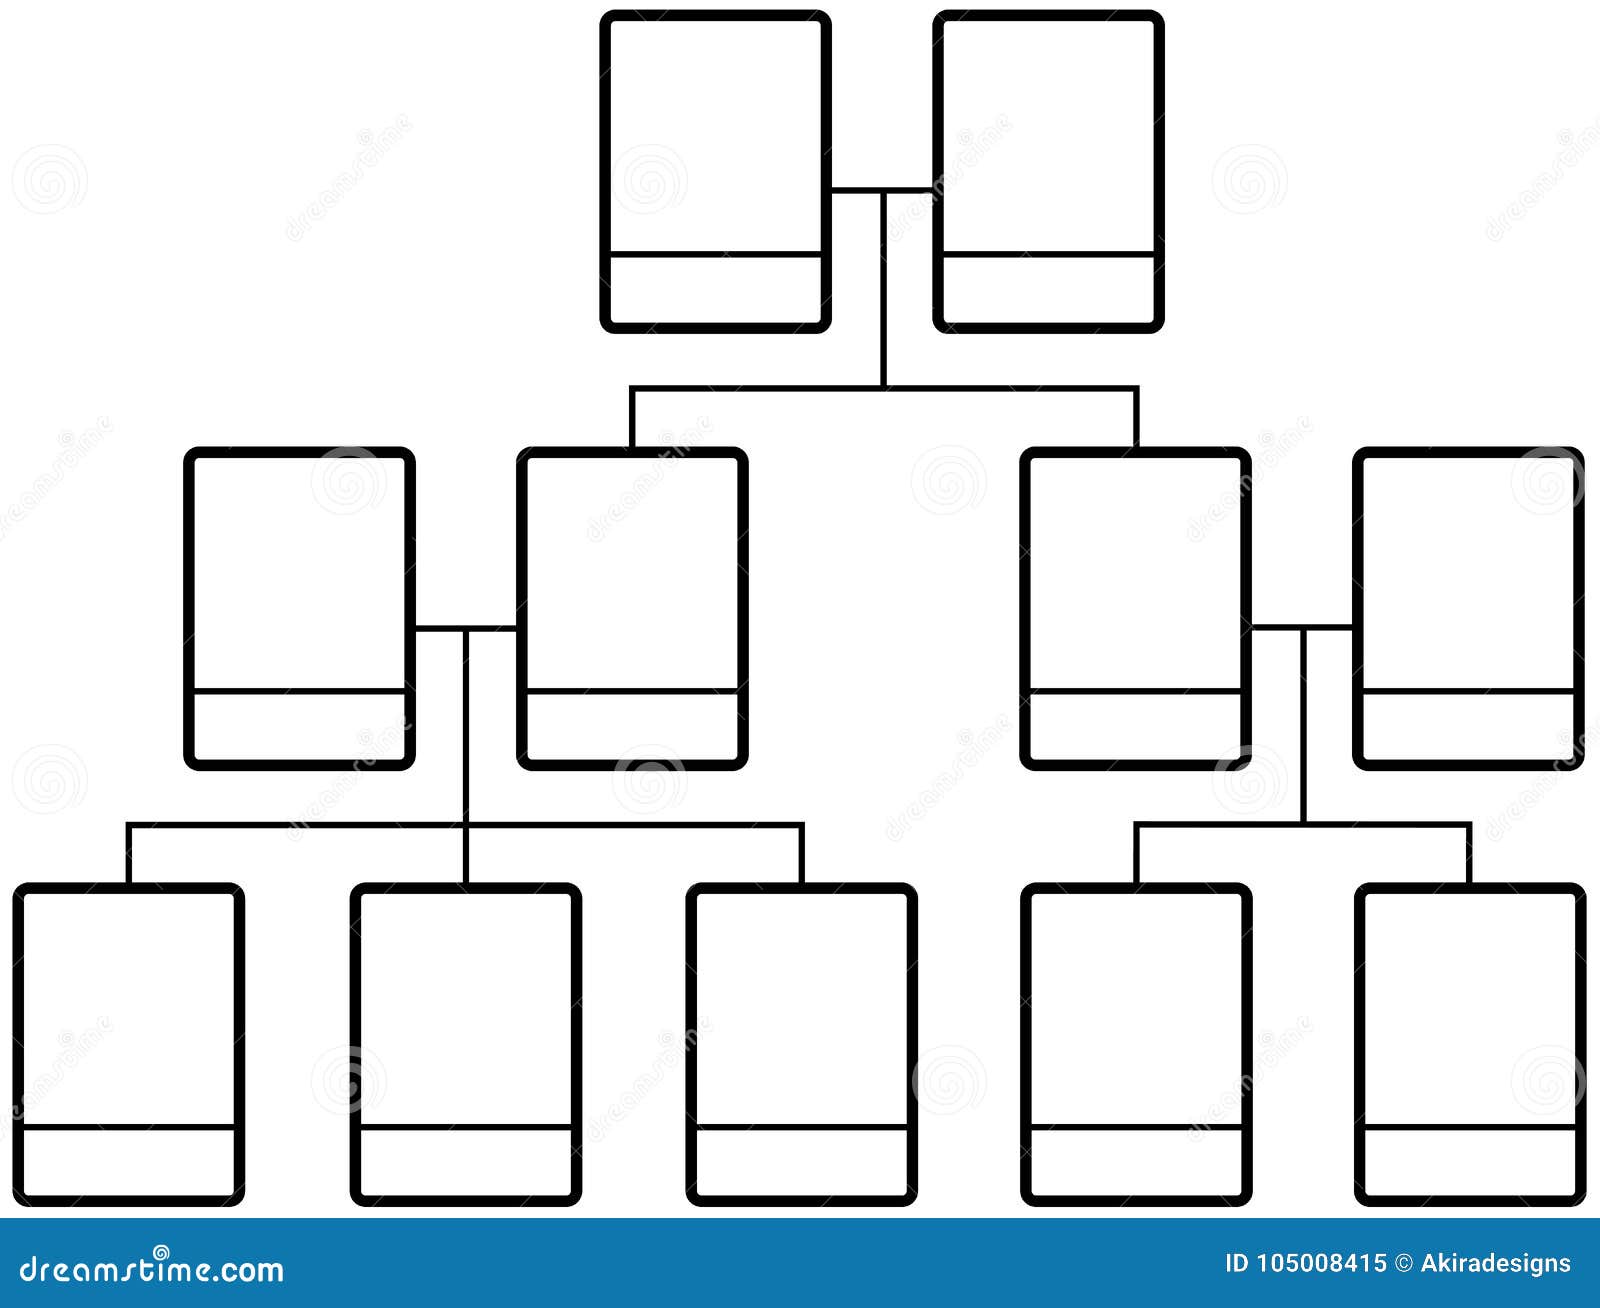 Family Tree Team Structure Blank Template Stock Vector Intended For Fill In The Blank Family Tree Template